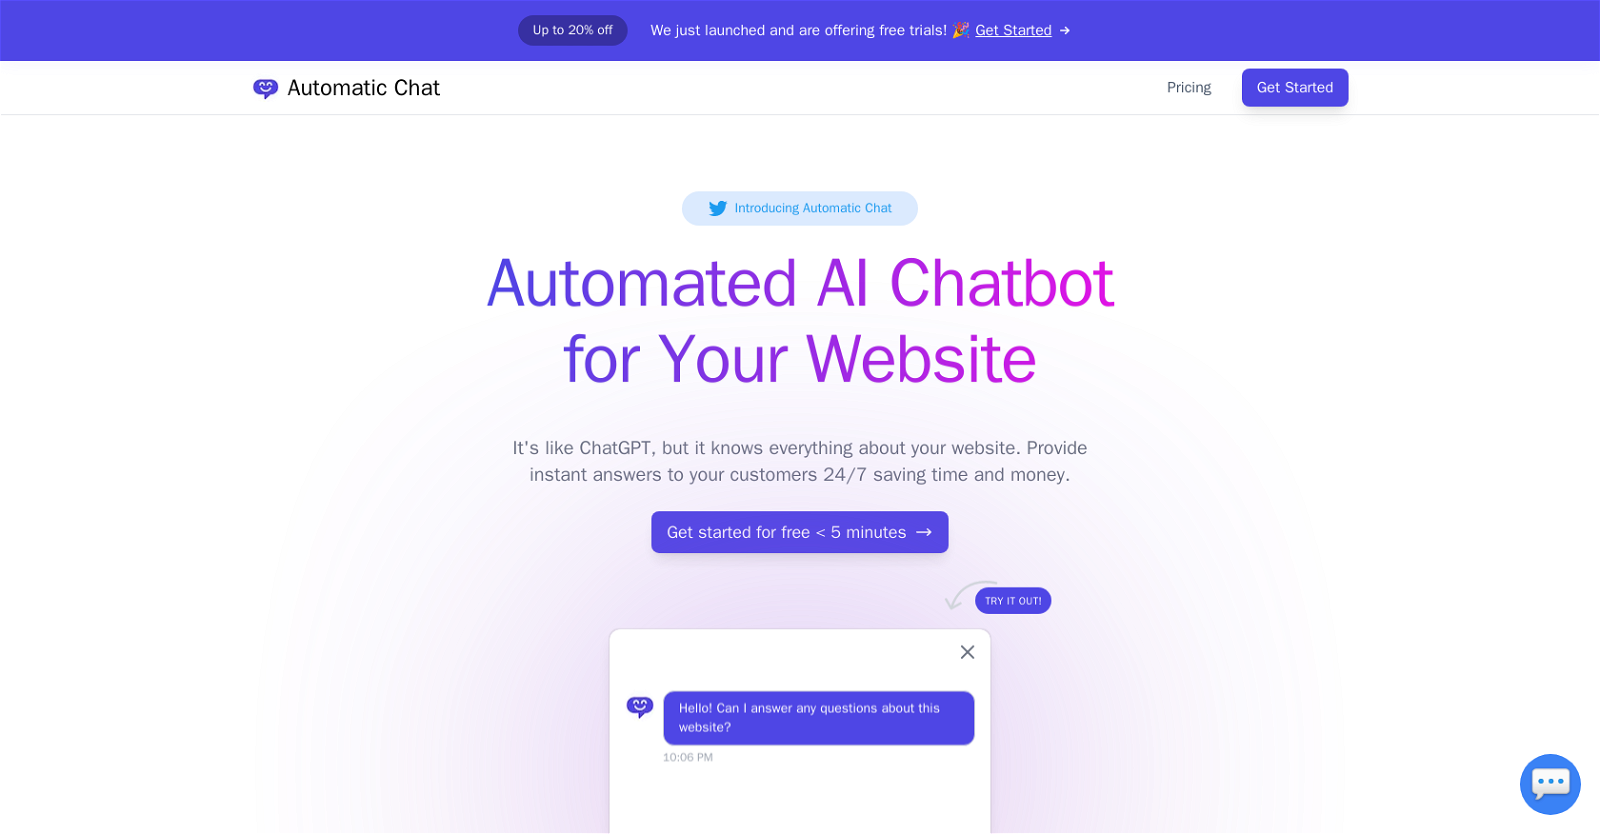 Automatic Chat website